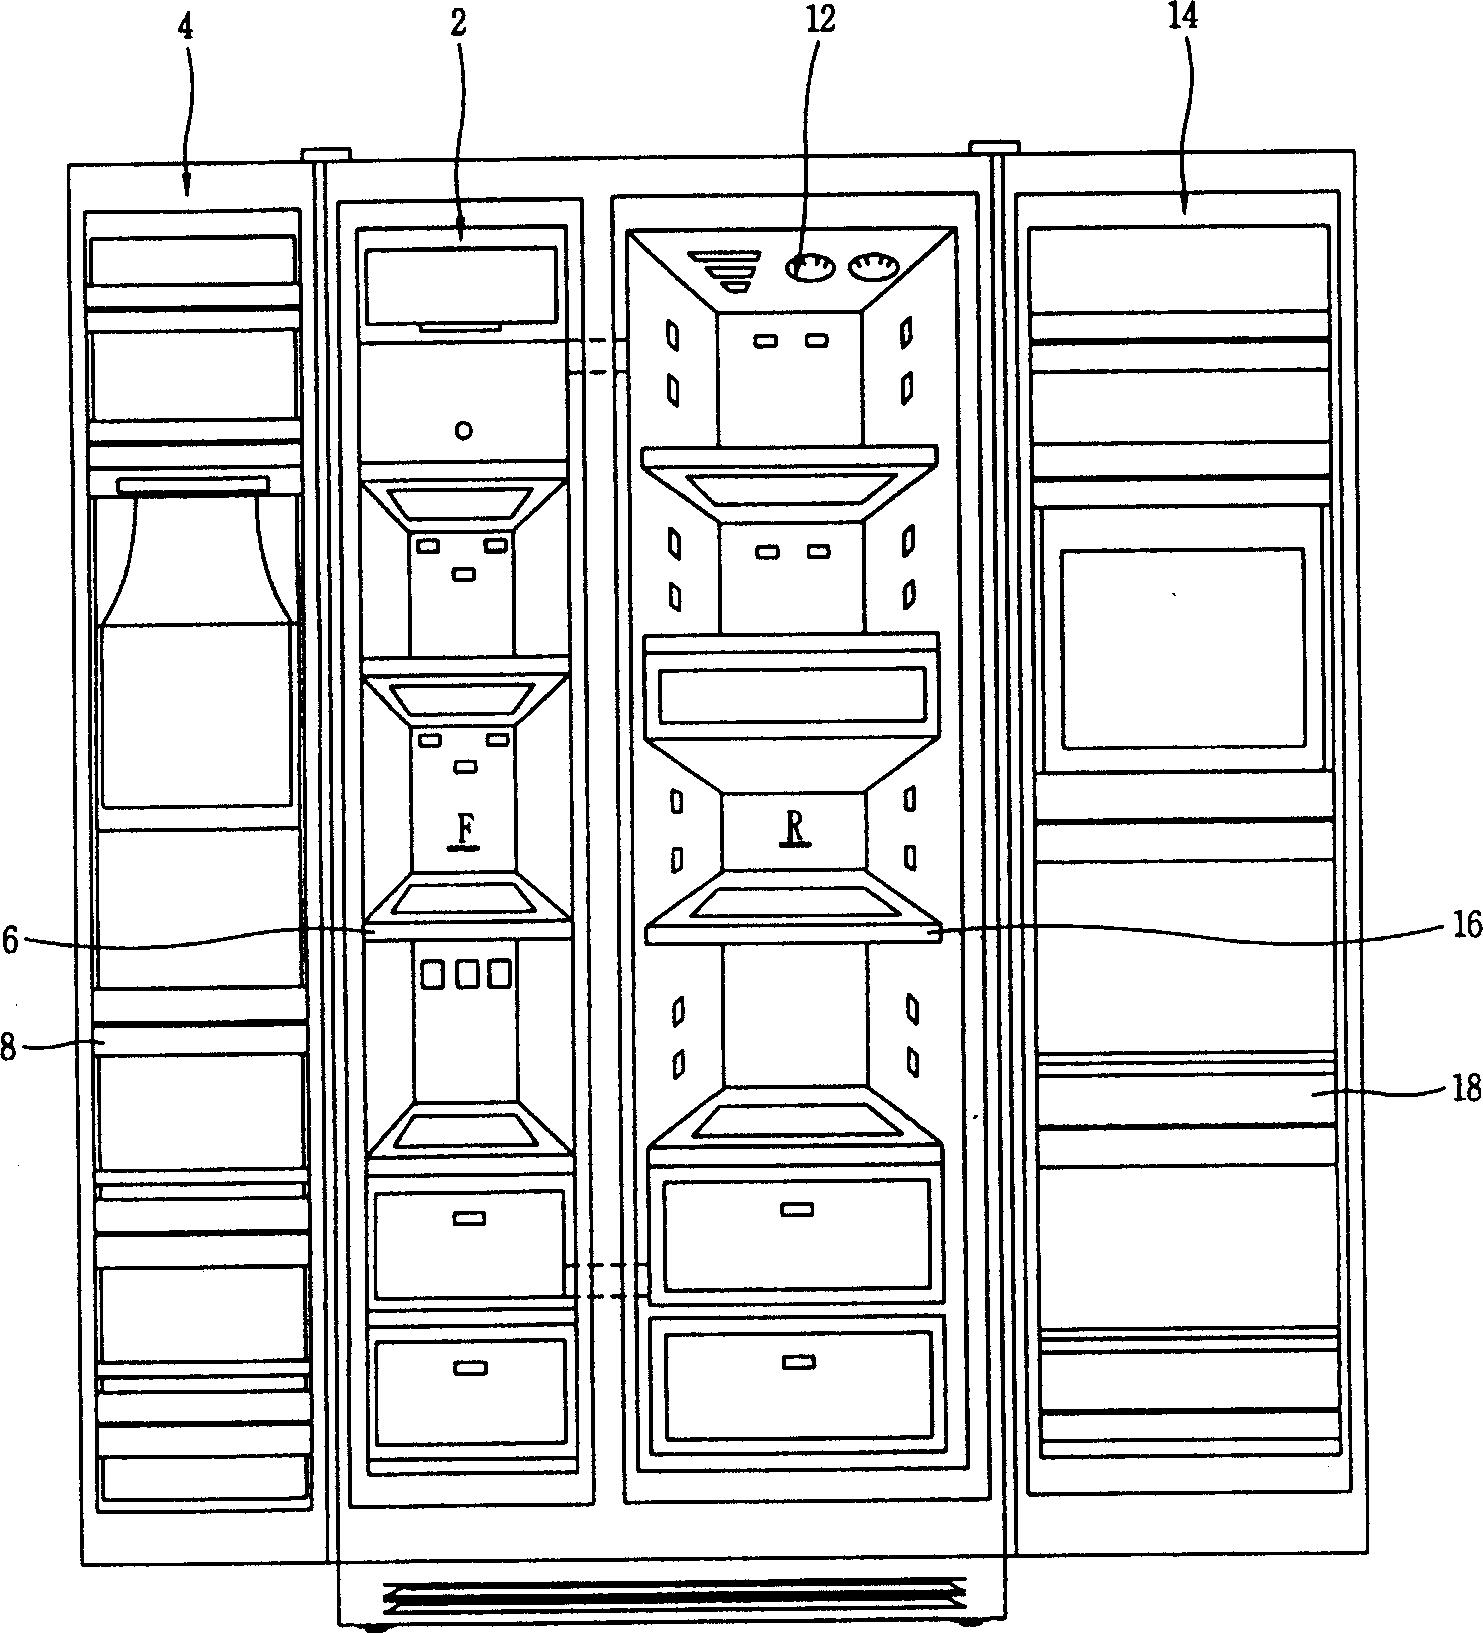 Separated wine cellar for refrigerator